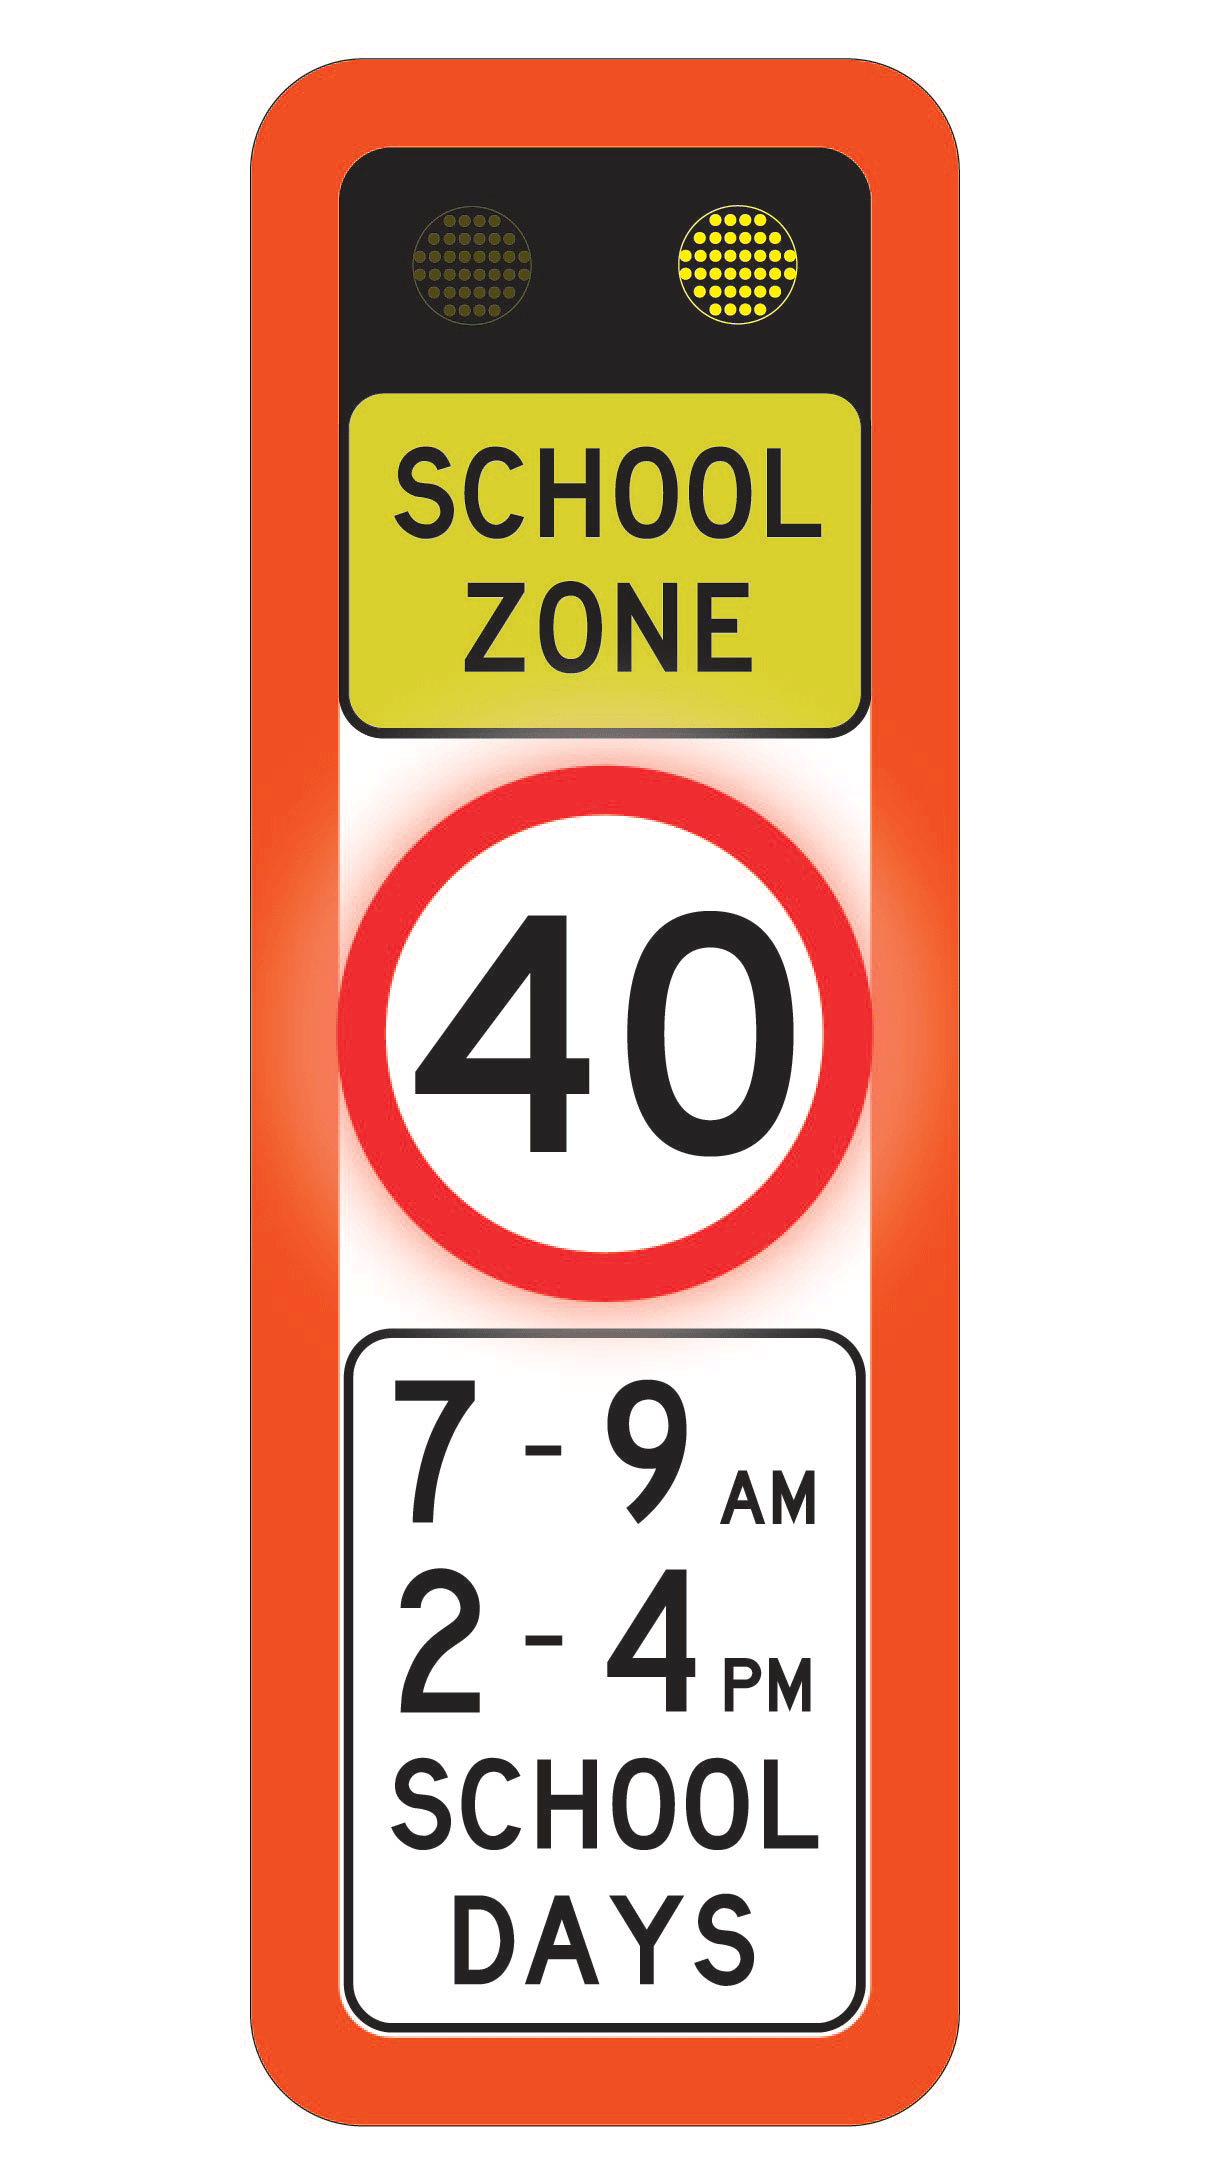 Flashing school zone sign showing alternating lights and speed ring